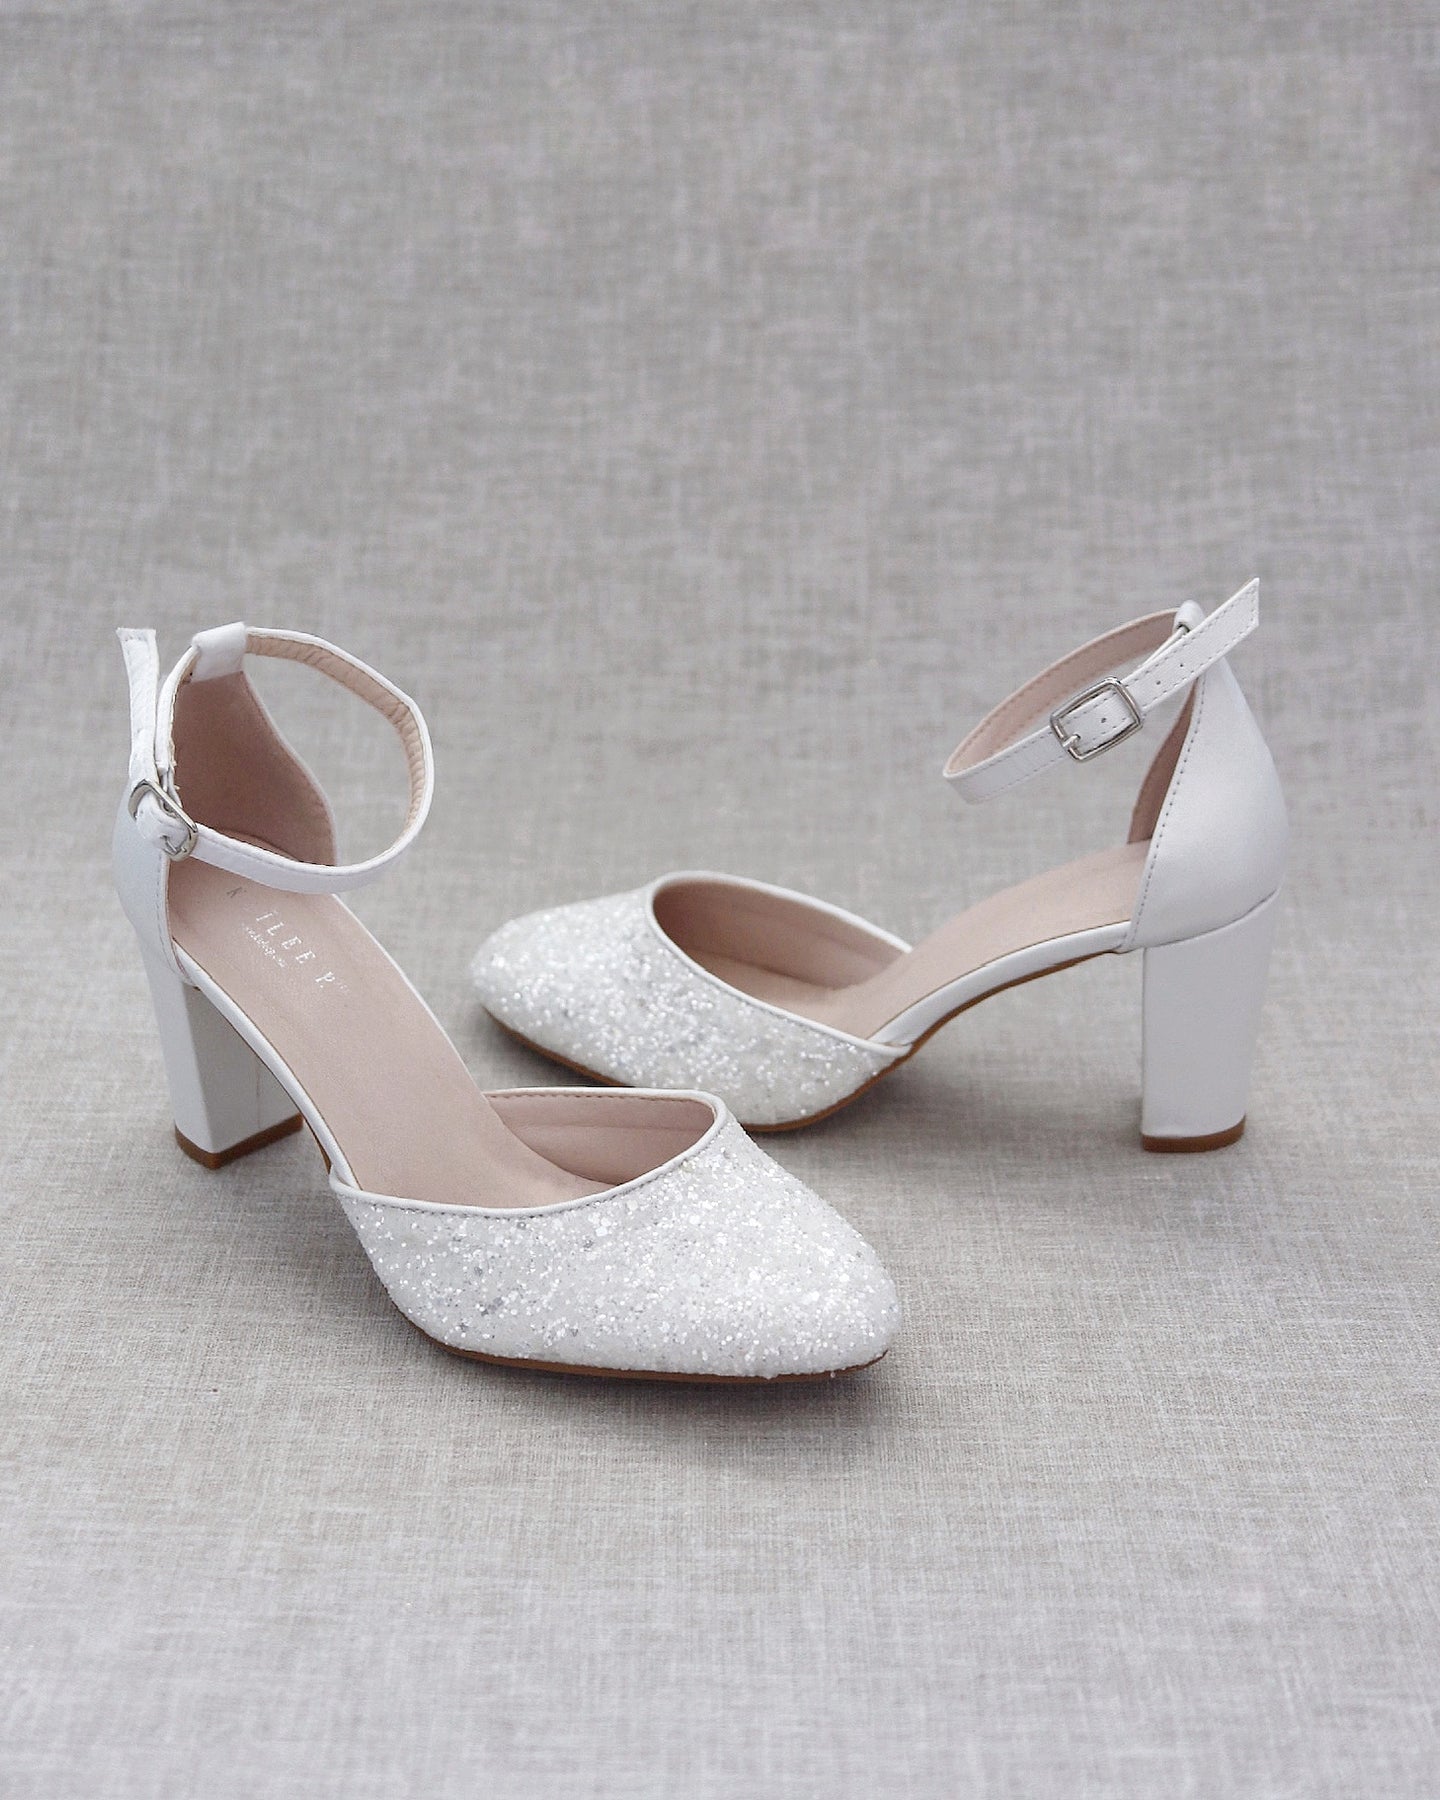 Pair of gray pointed-toe platform pumps with silver studs, Court